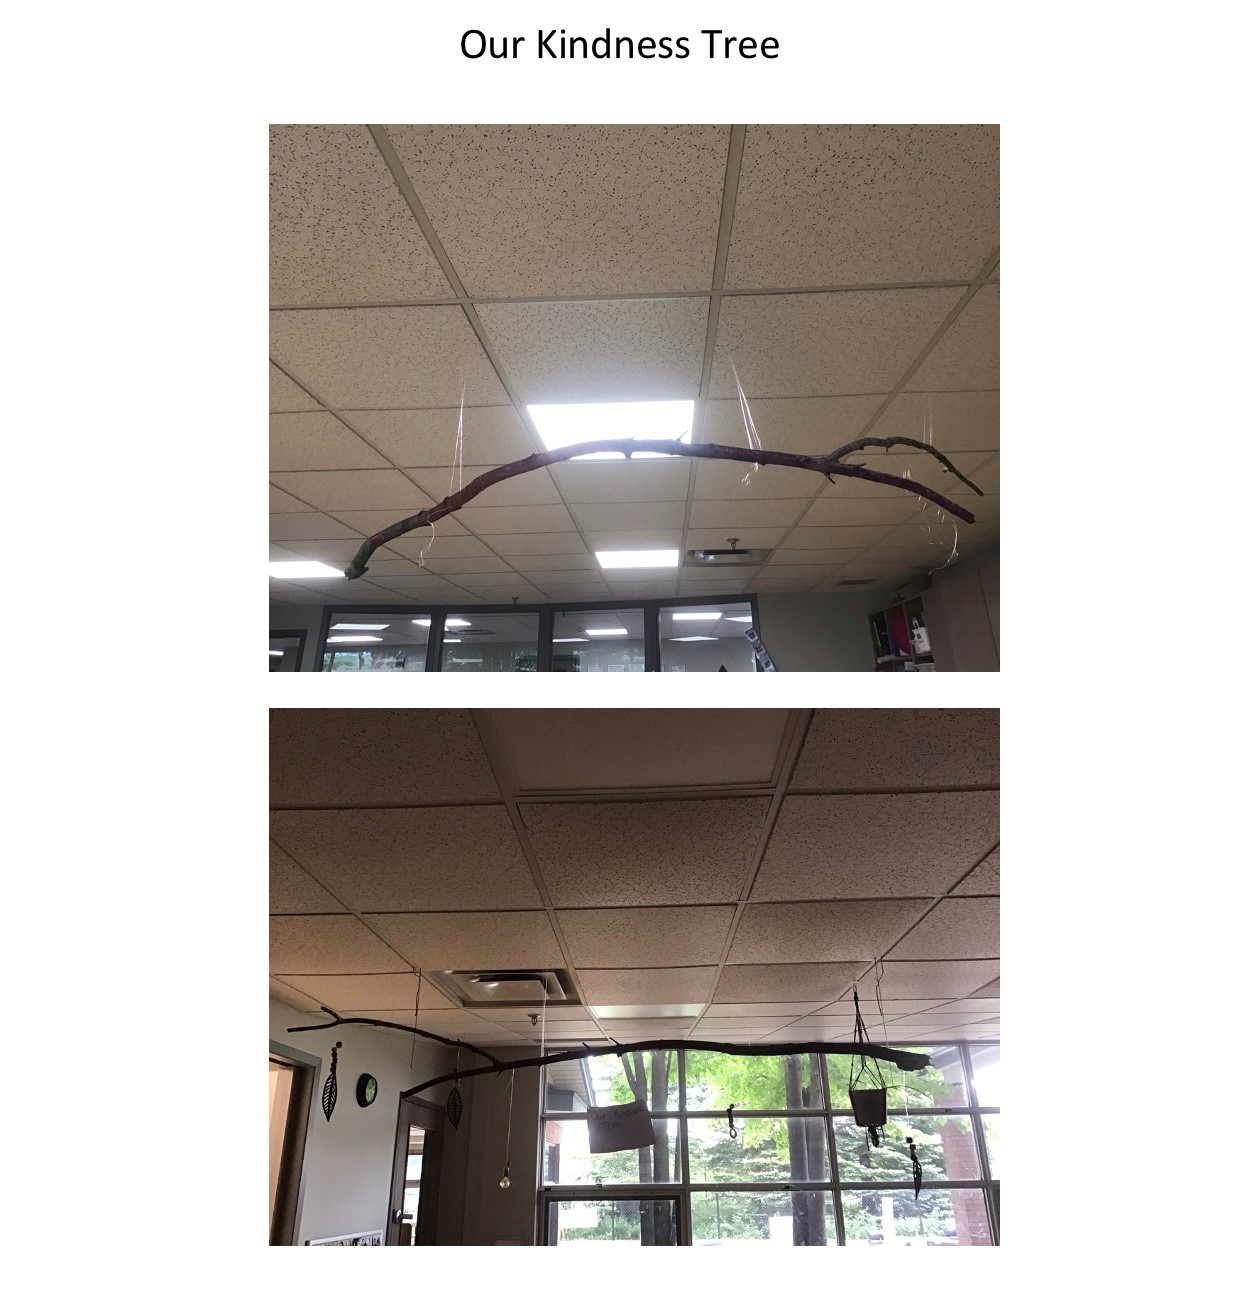 A branch hangs from the ceiling with a window behind it in two different images. The first image the branch is plain, the second has a paper hanging from it with the words, "Our kindness tree" written.